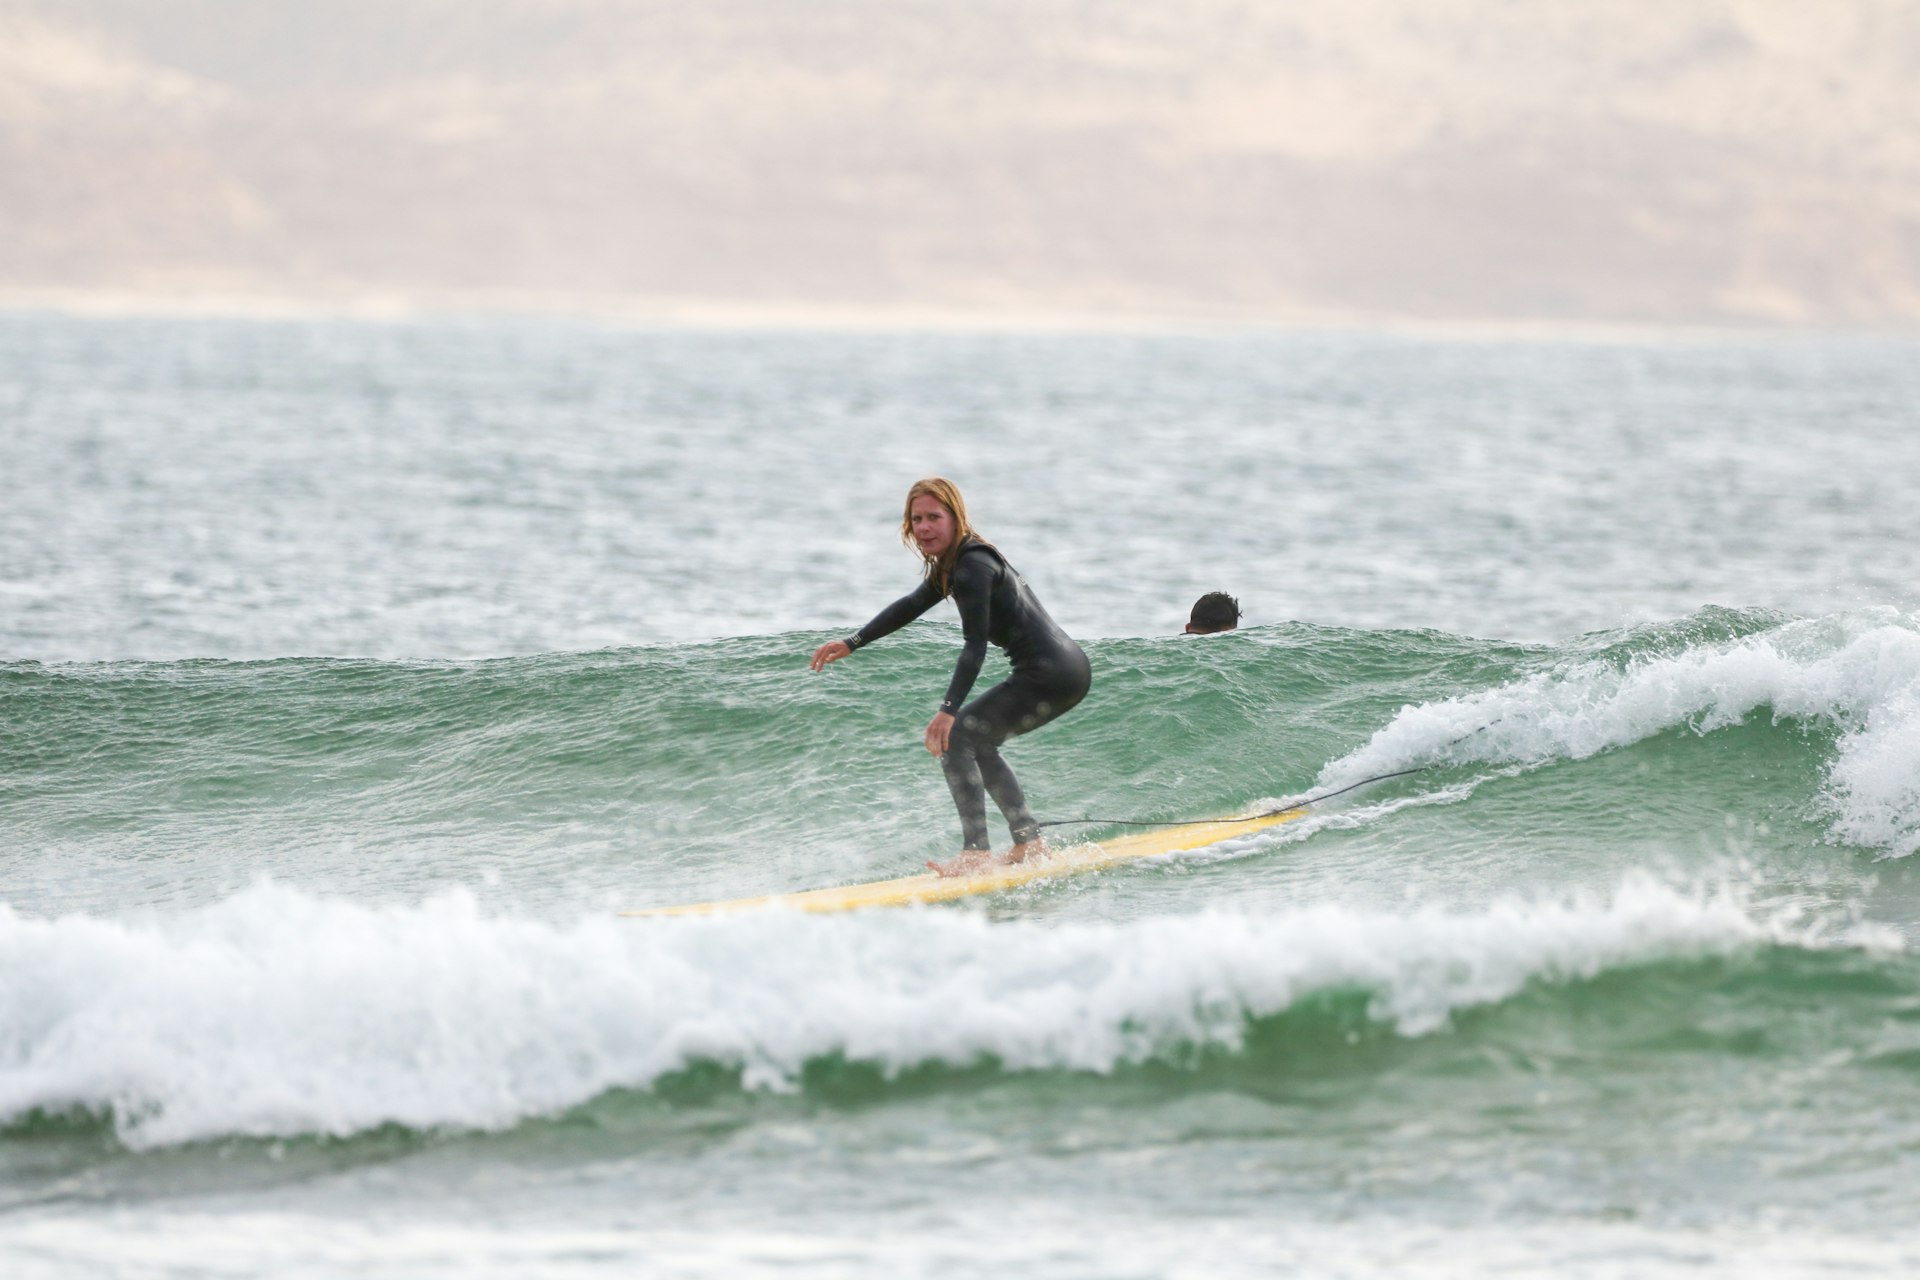 Sally Kirby rides a wave on a longboard in Imsouane, Morocco